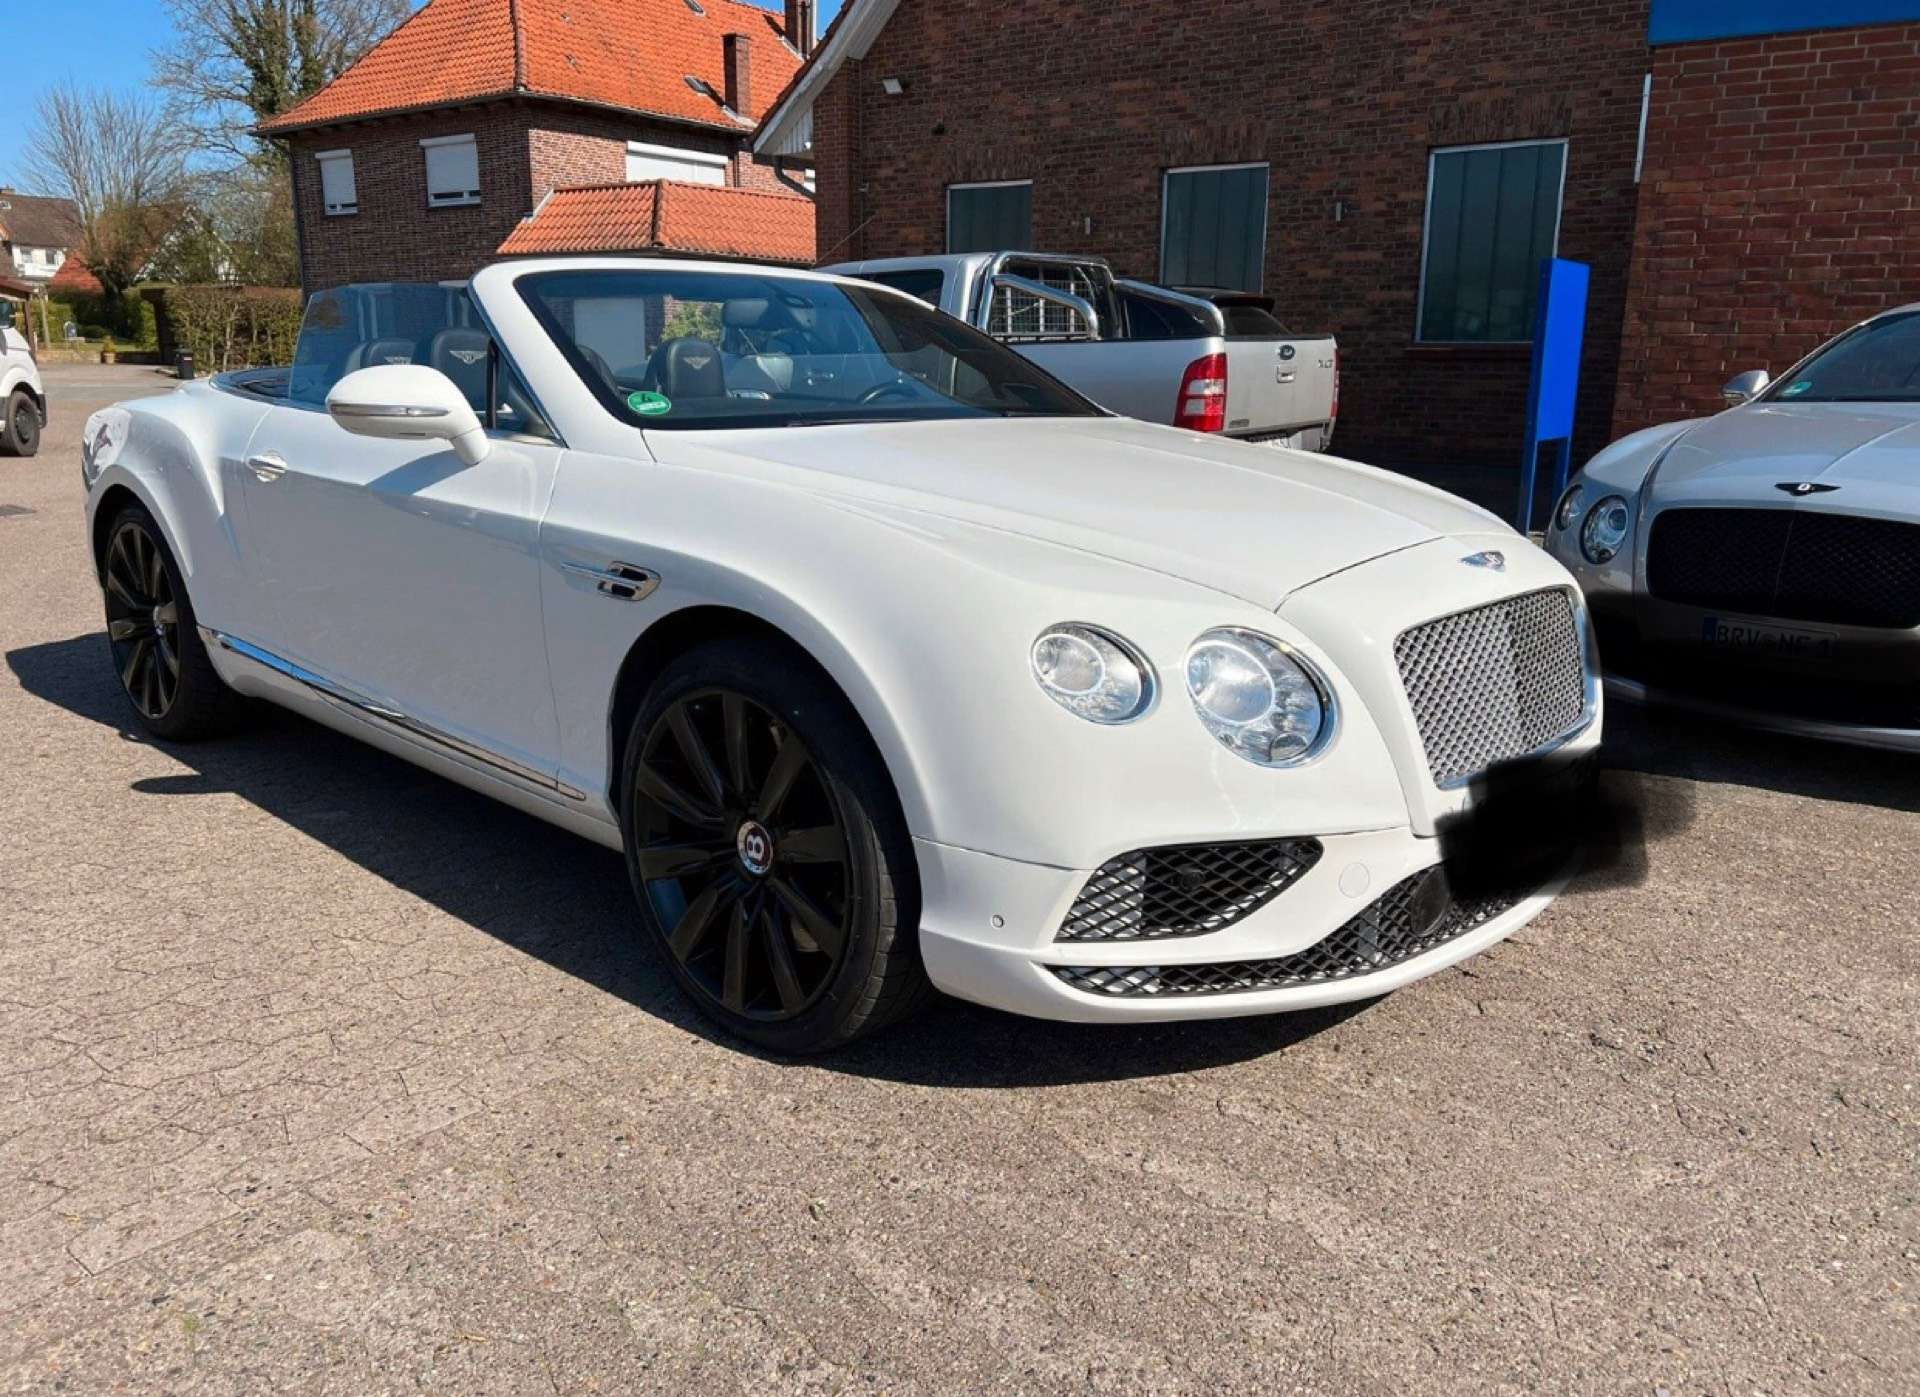 Bentley Continental Convertible in White used in Ceriale - SV for € 90,000.-